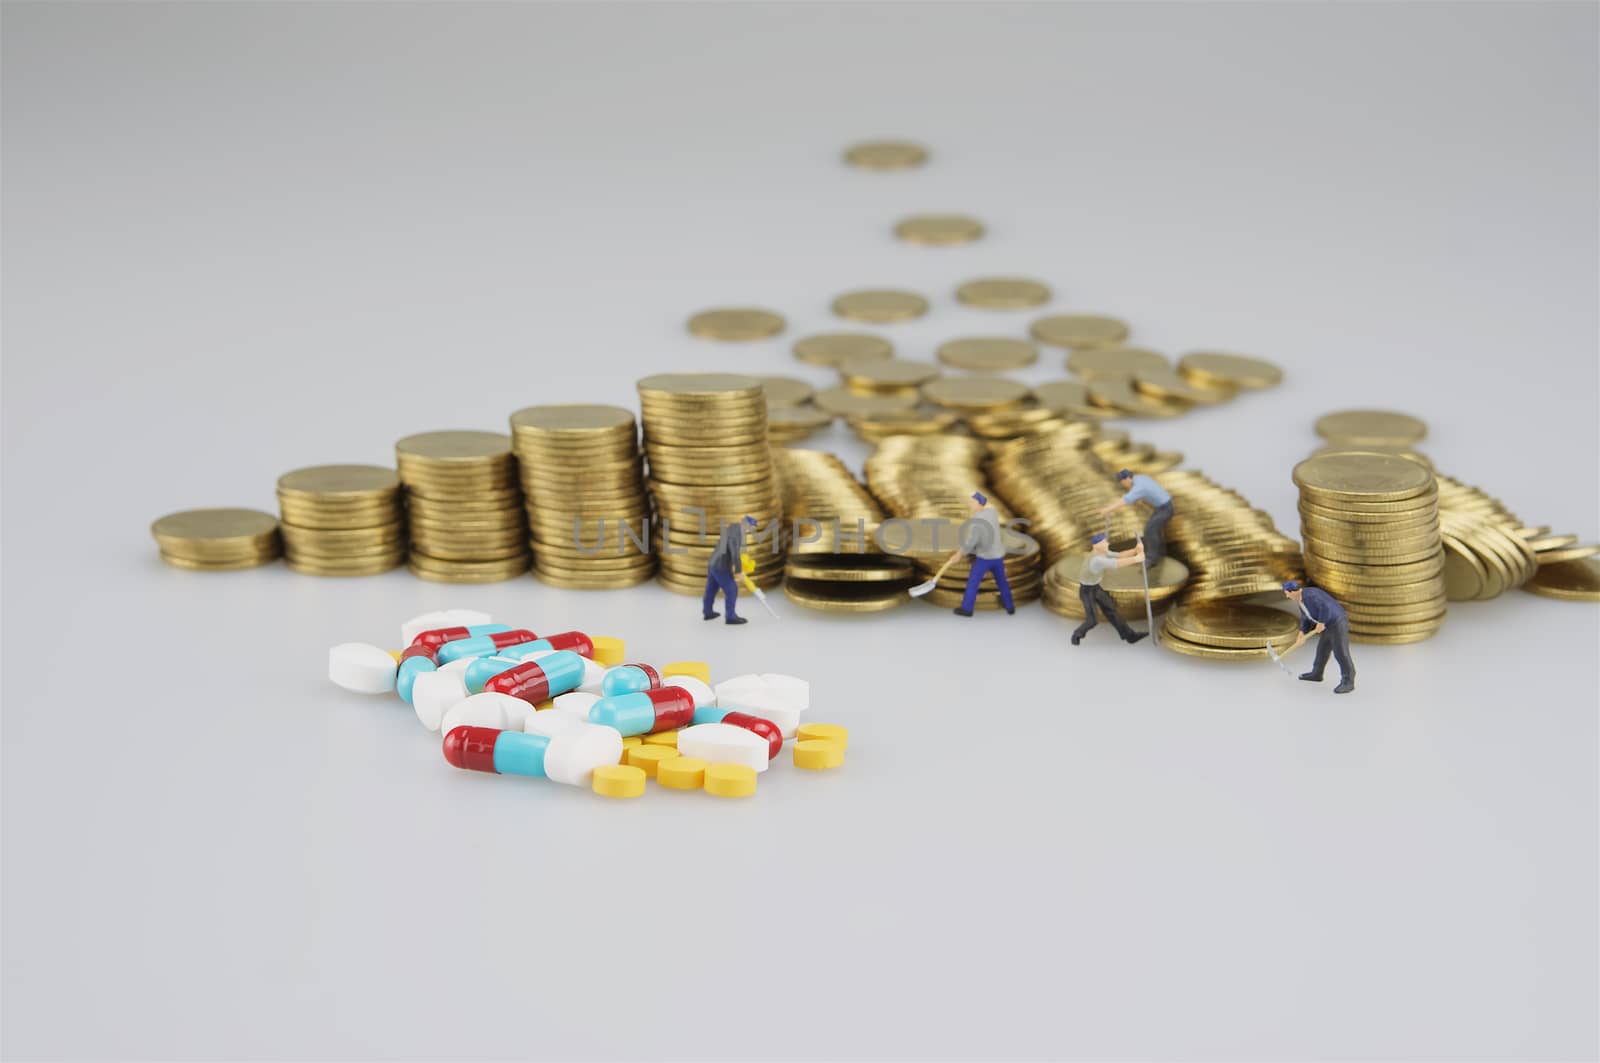 Stack of gold coin with miniature people and medicine on white background.